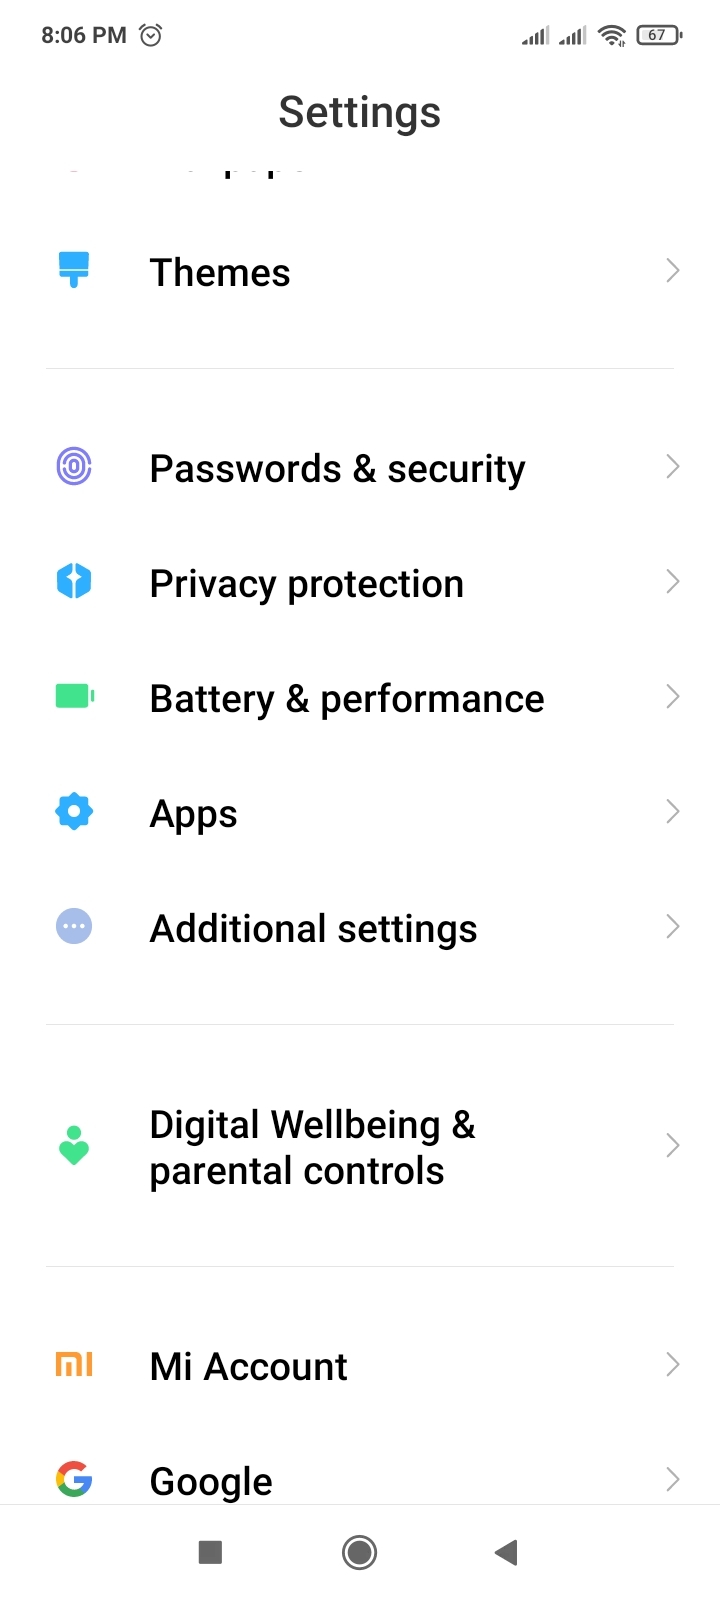 9 FIXES to Snapchat Account Locked On Android [Guide]